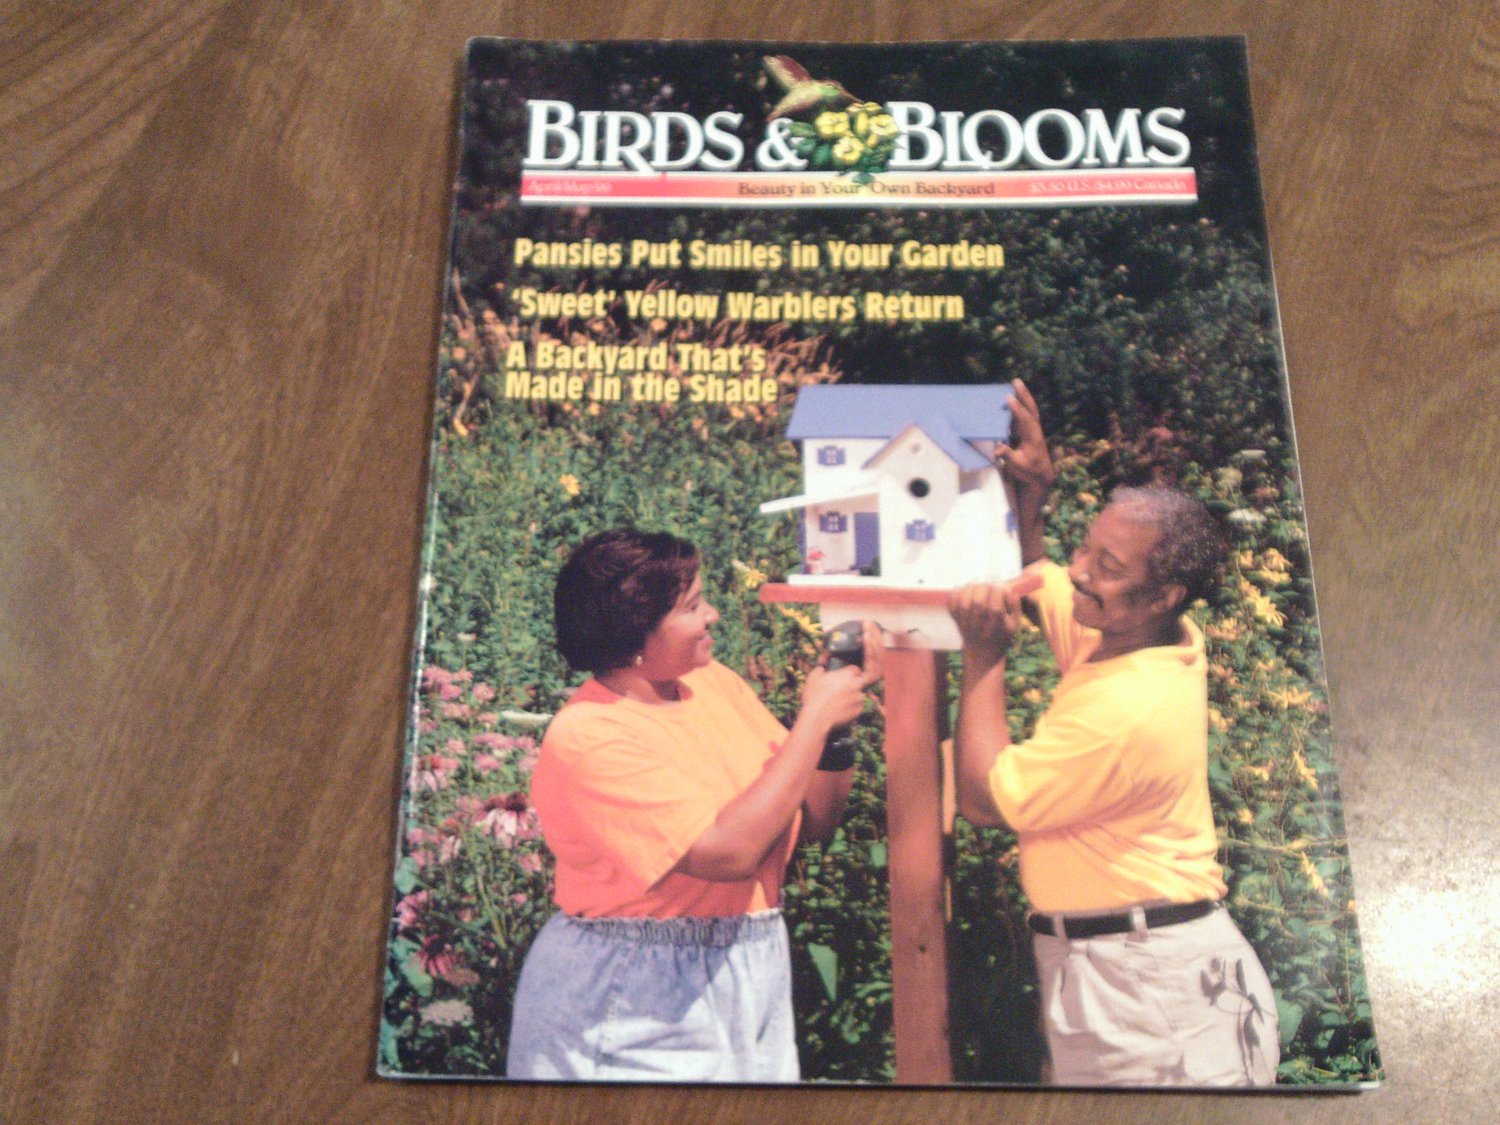 Birds & Blooms Magazine - Beauty in Your Own Backyard April/May 1999 Vol 5 No 2 (B2)